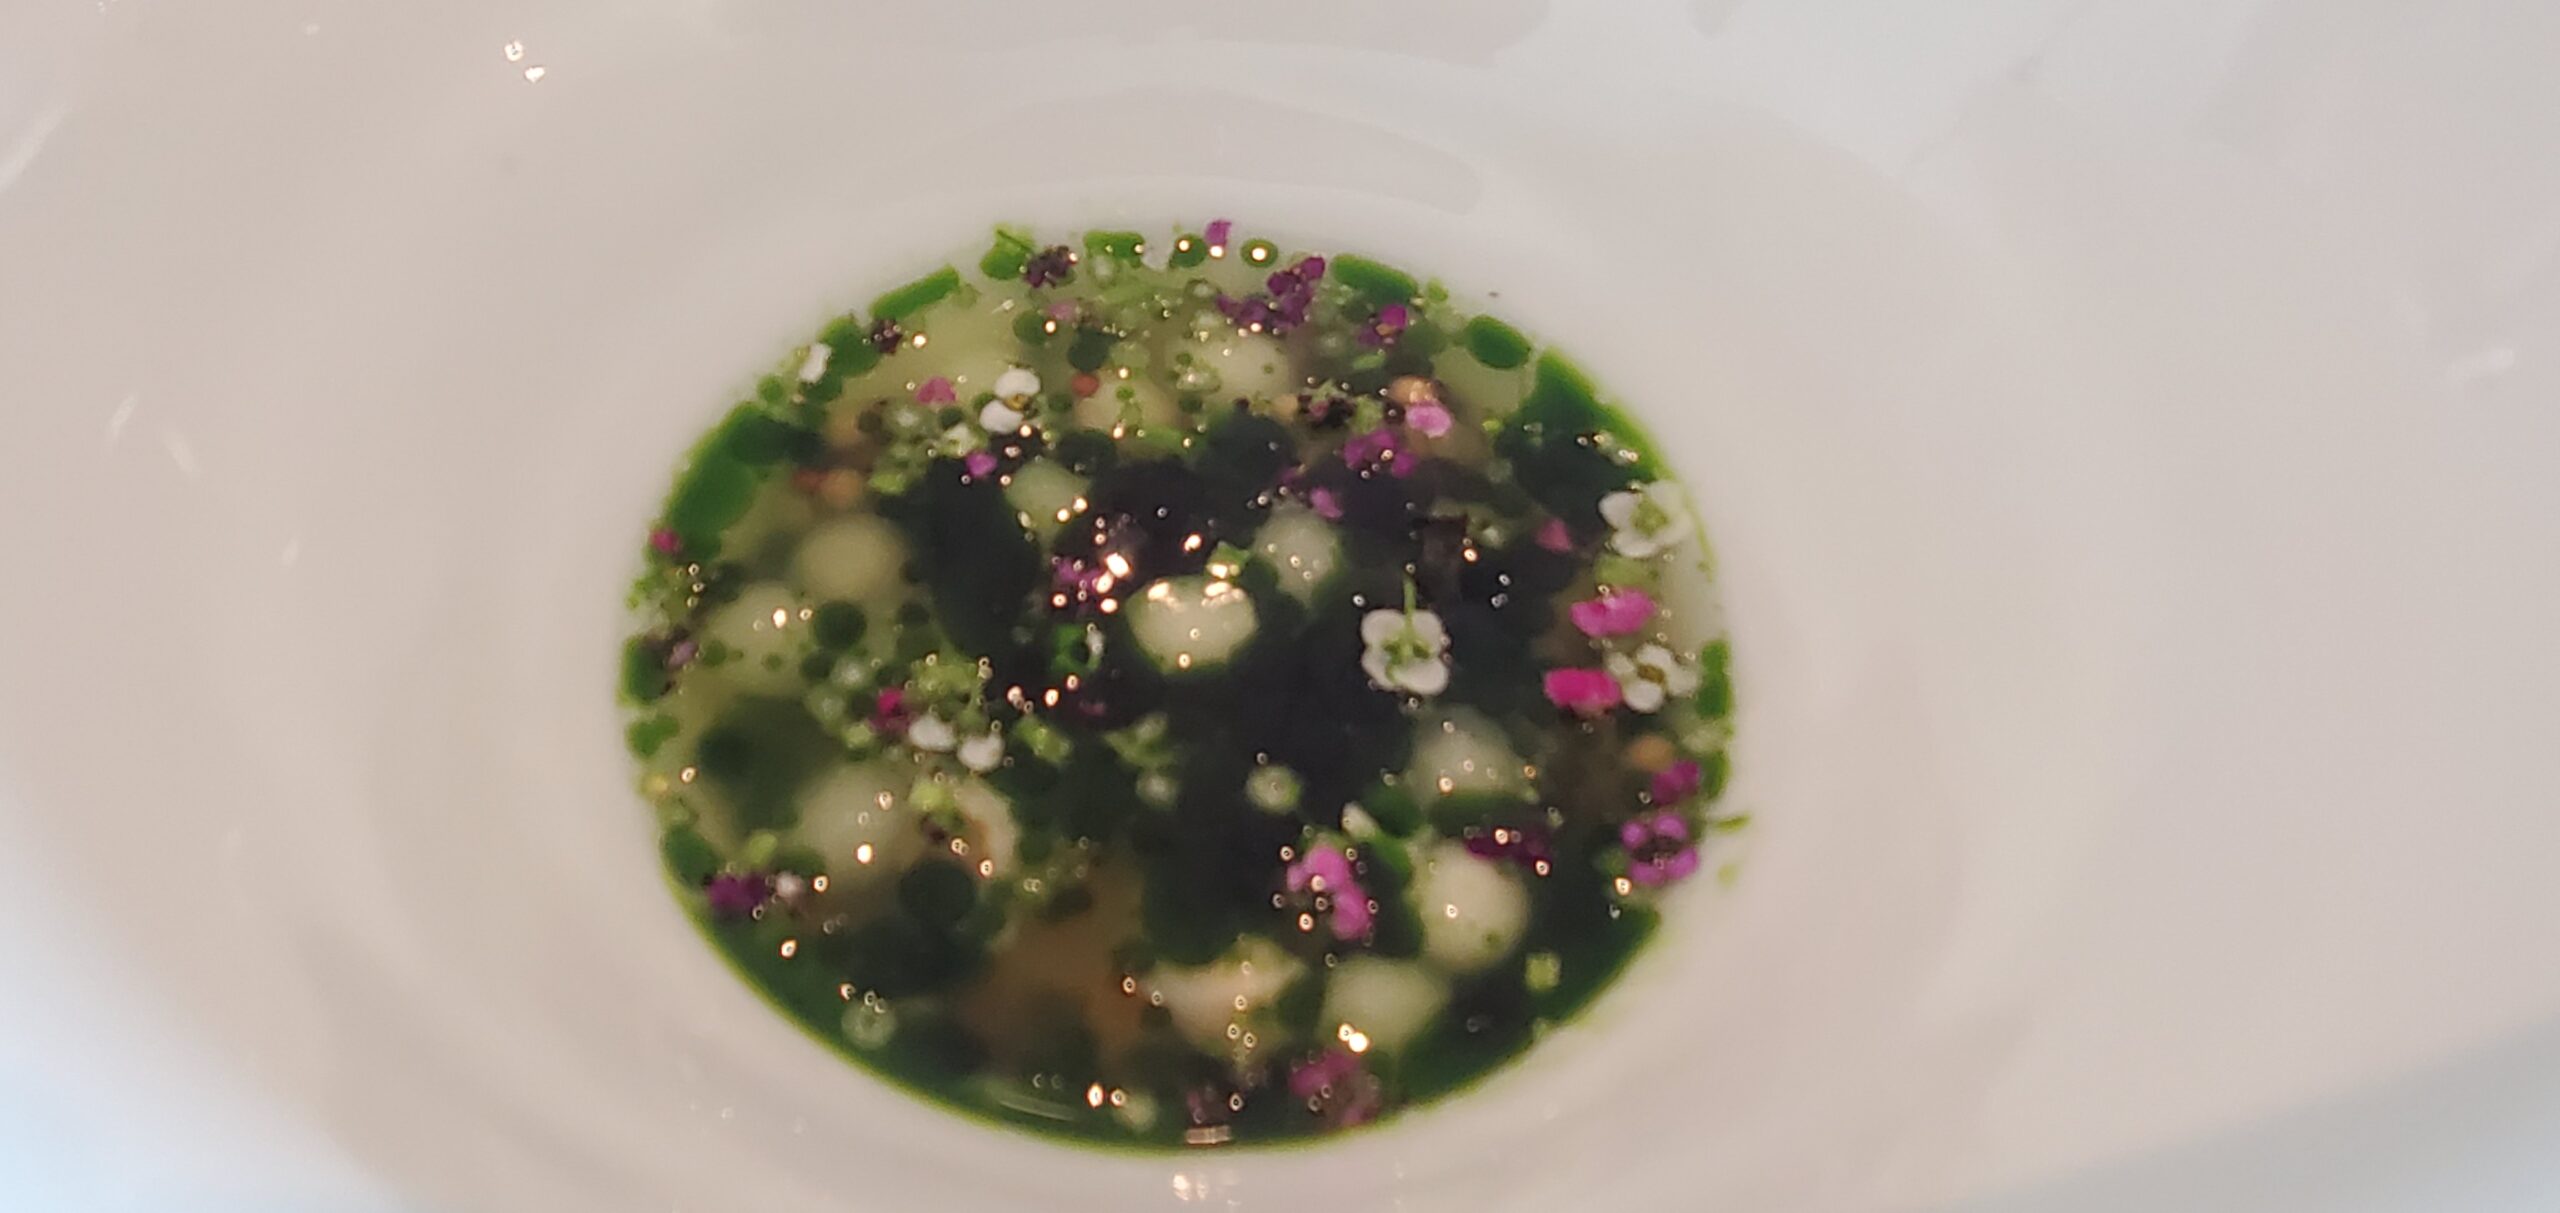 a bowl of food with green and purple liquid